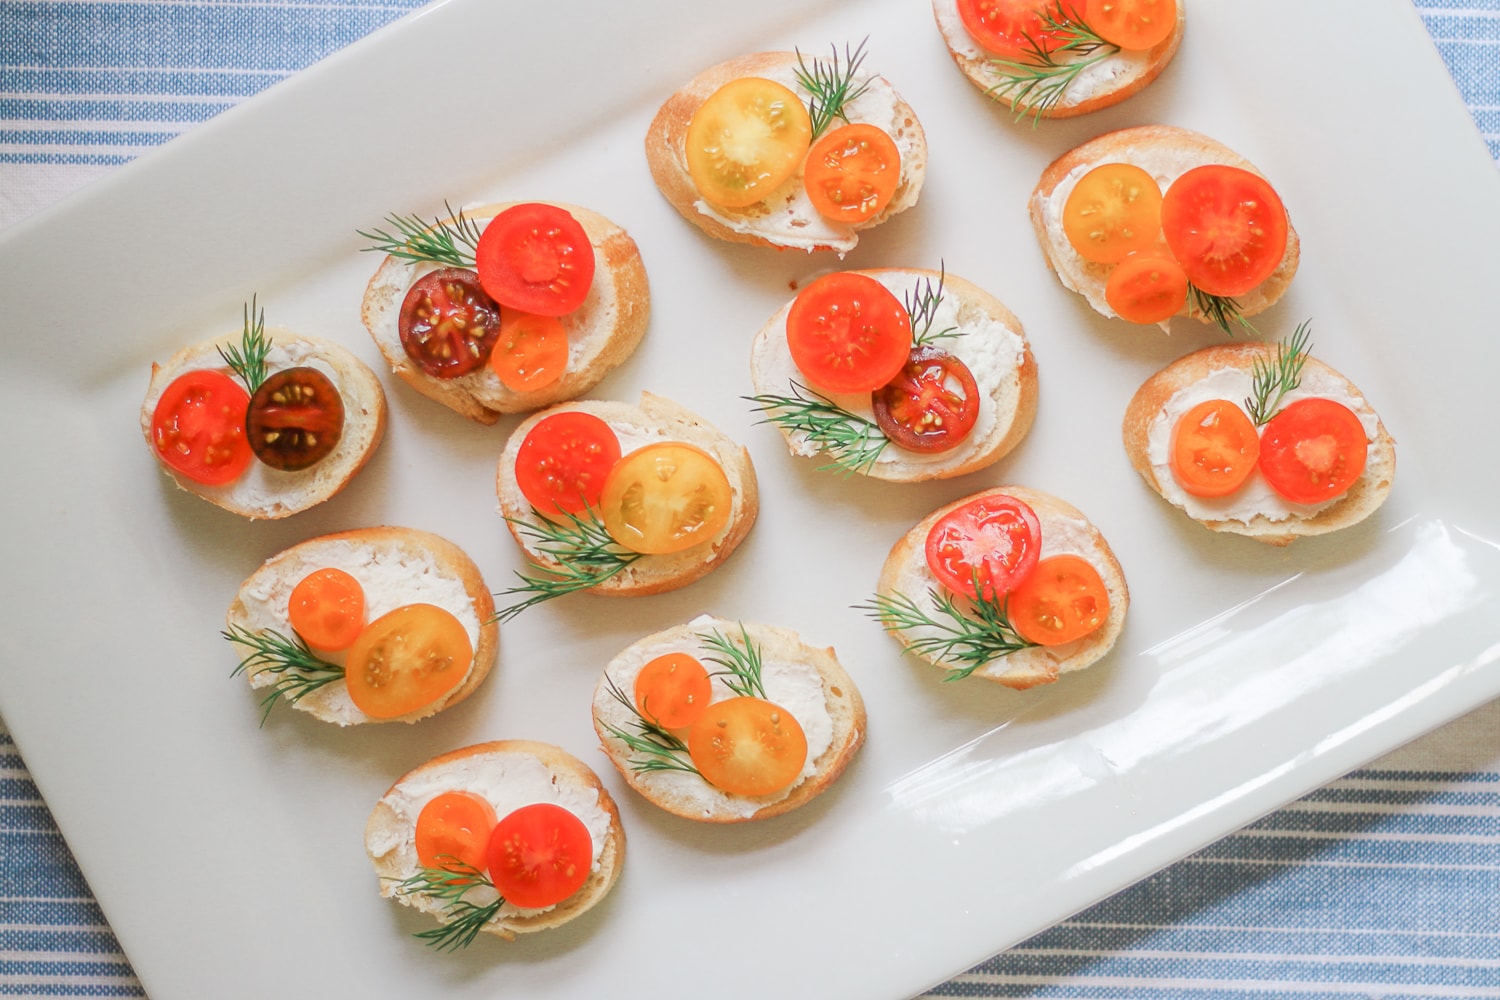 Southern lifestyle blogger Stephanie Ziajka shares why this goat cheese tomato recipe is one of her favorites for summer on Diary of a Debutante